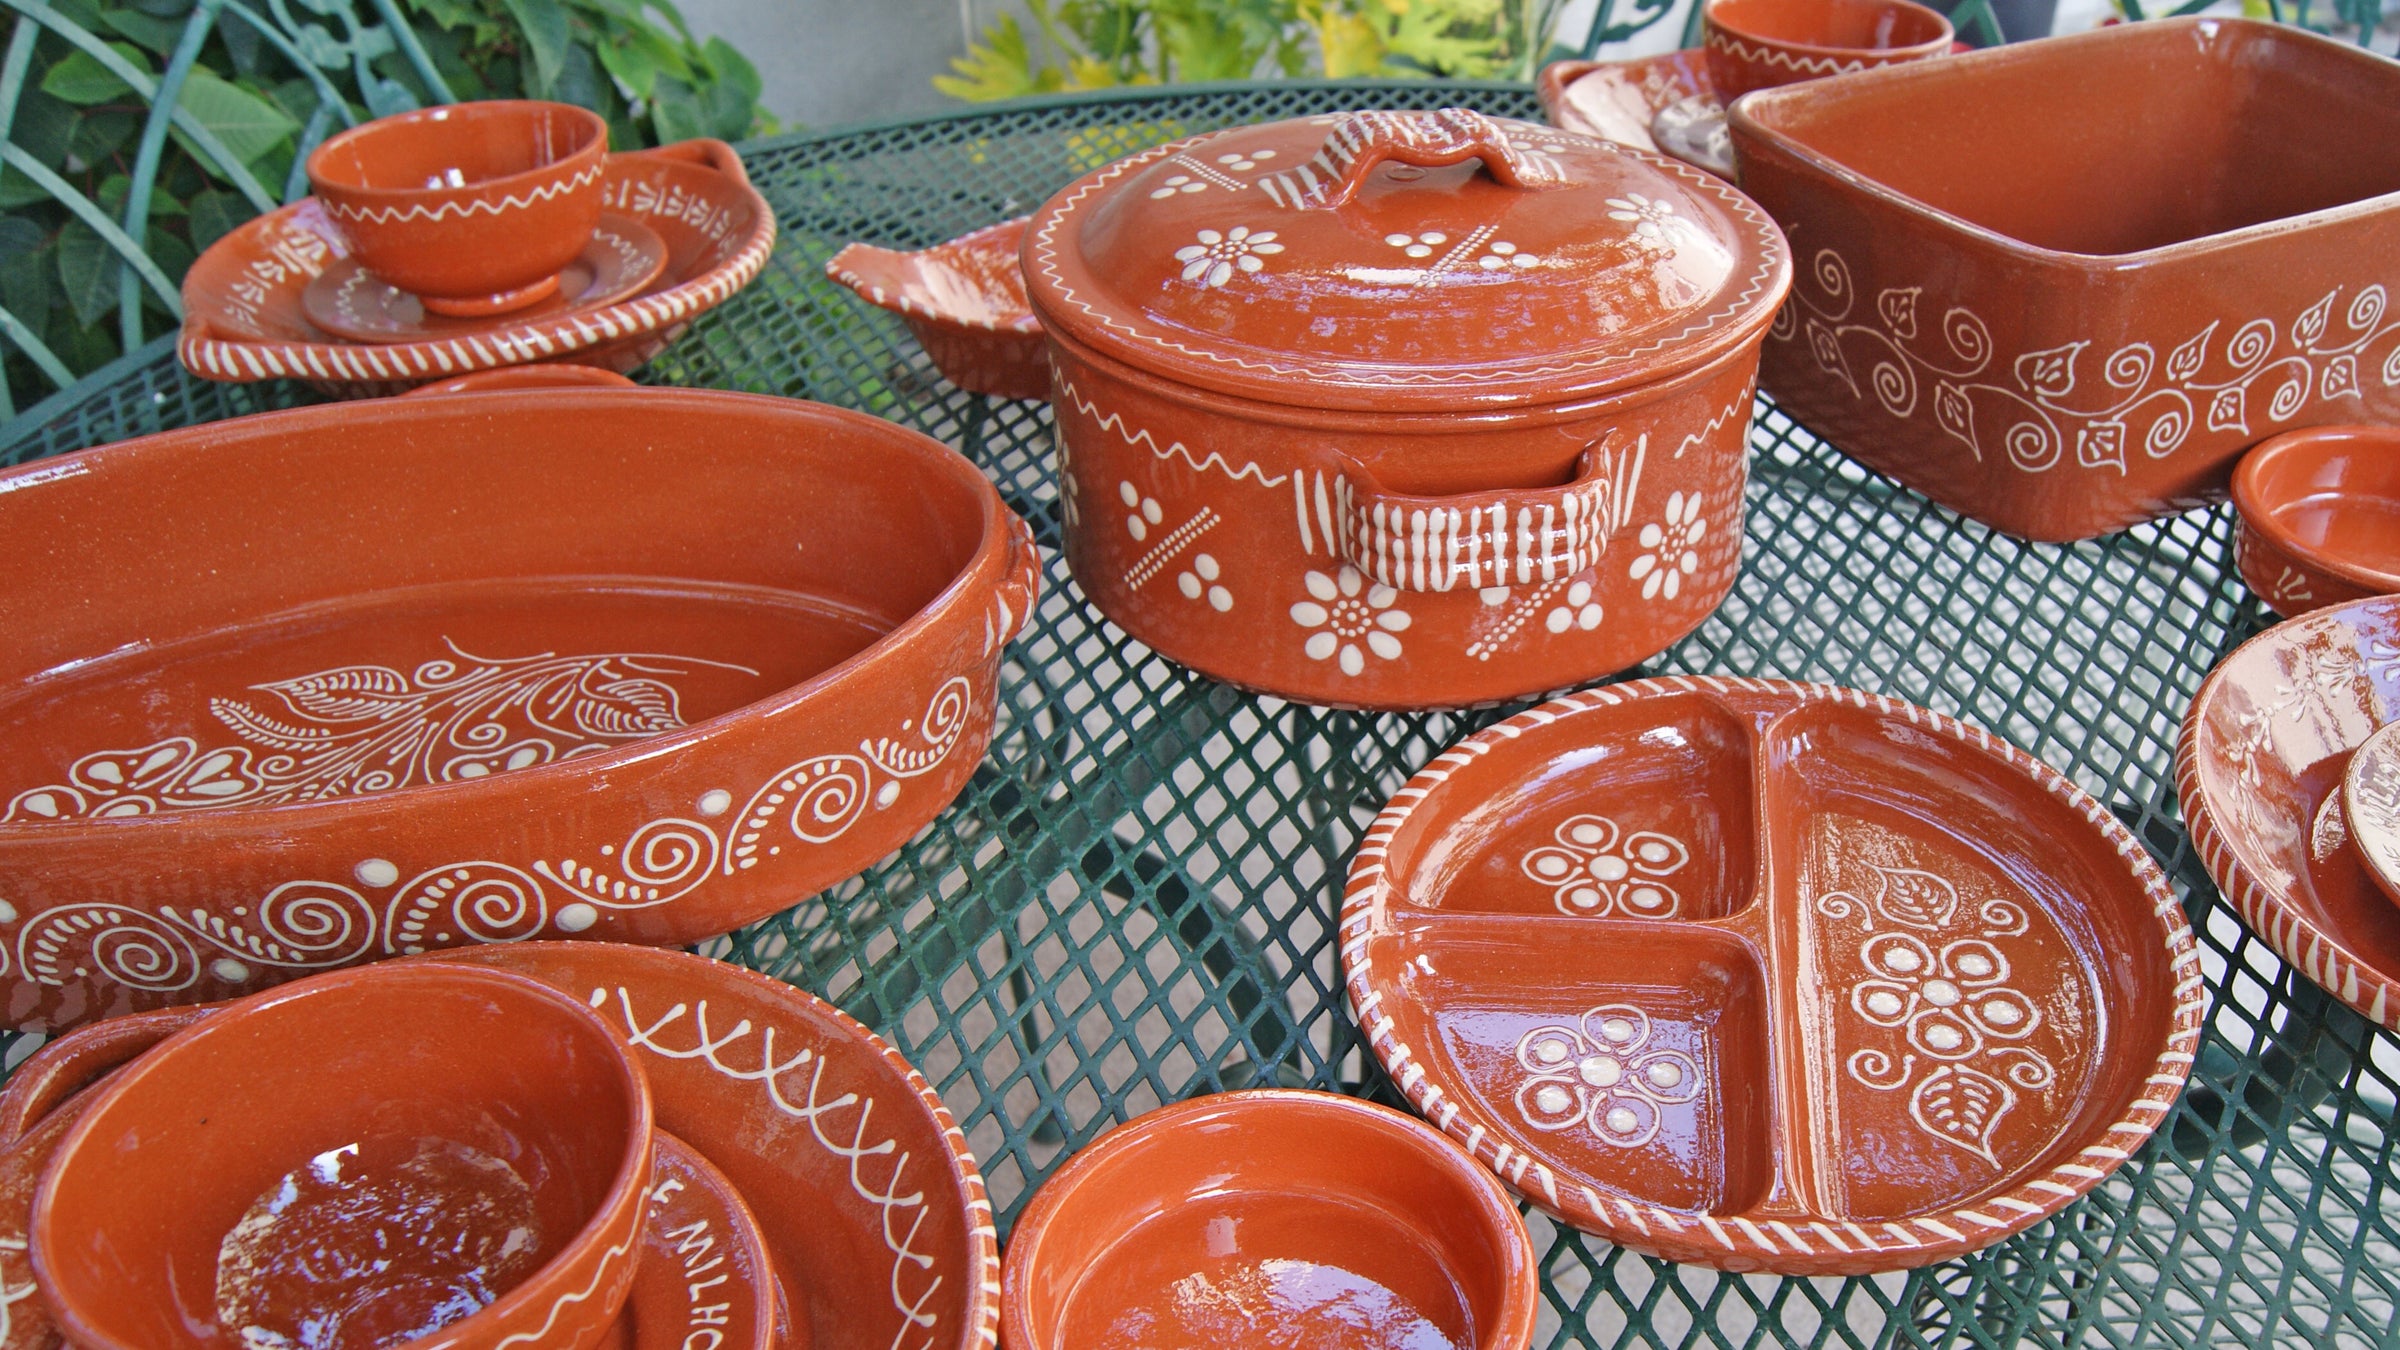 A collection of Barcelos Regional Pottery, made from clay, that are used for cooking hot foods in ovens and stoves, to serve cold foods, and to be used as decorative items. 